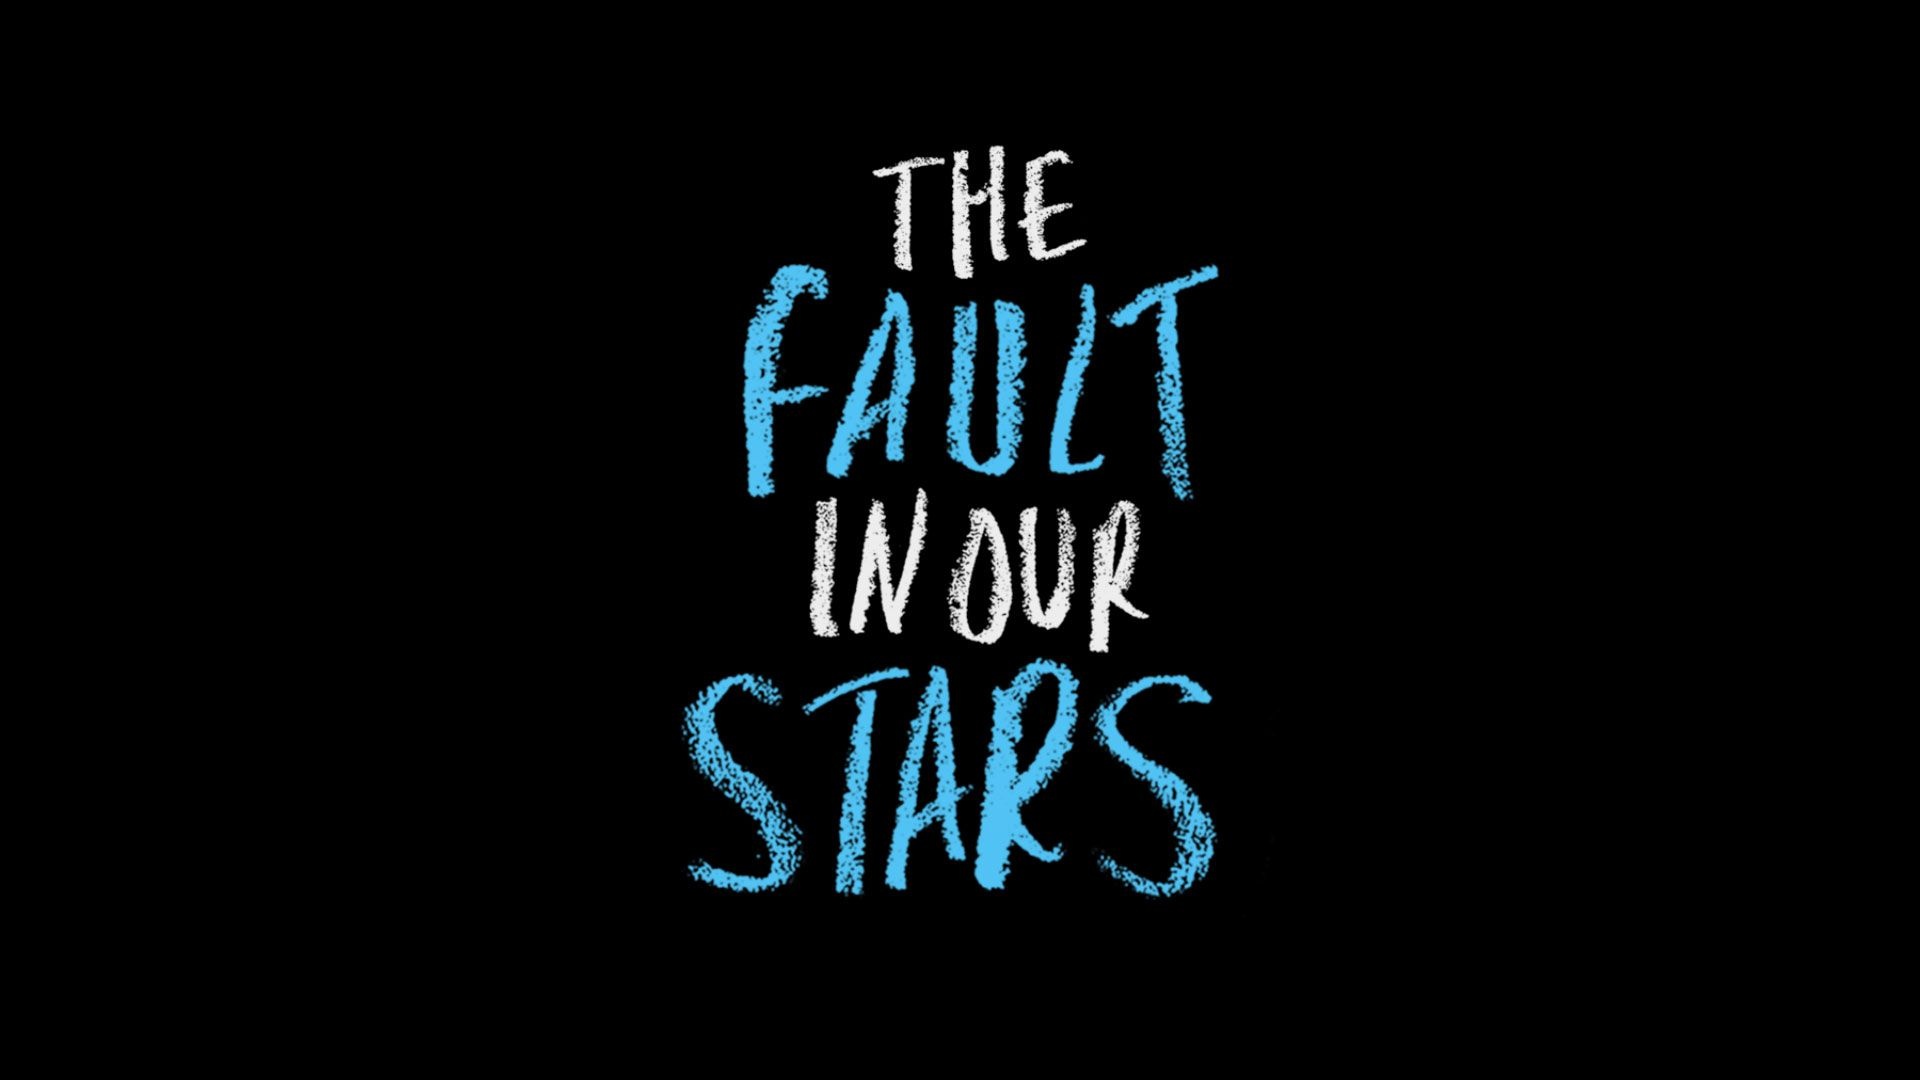 The Fault in Our Stars, Emotional rollercoaster, Unforgettable love story, Heart-wrenching, 1920x1080 Full HD Desktop